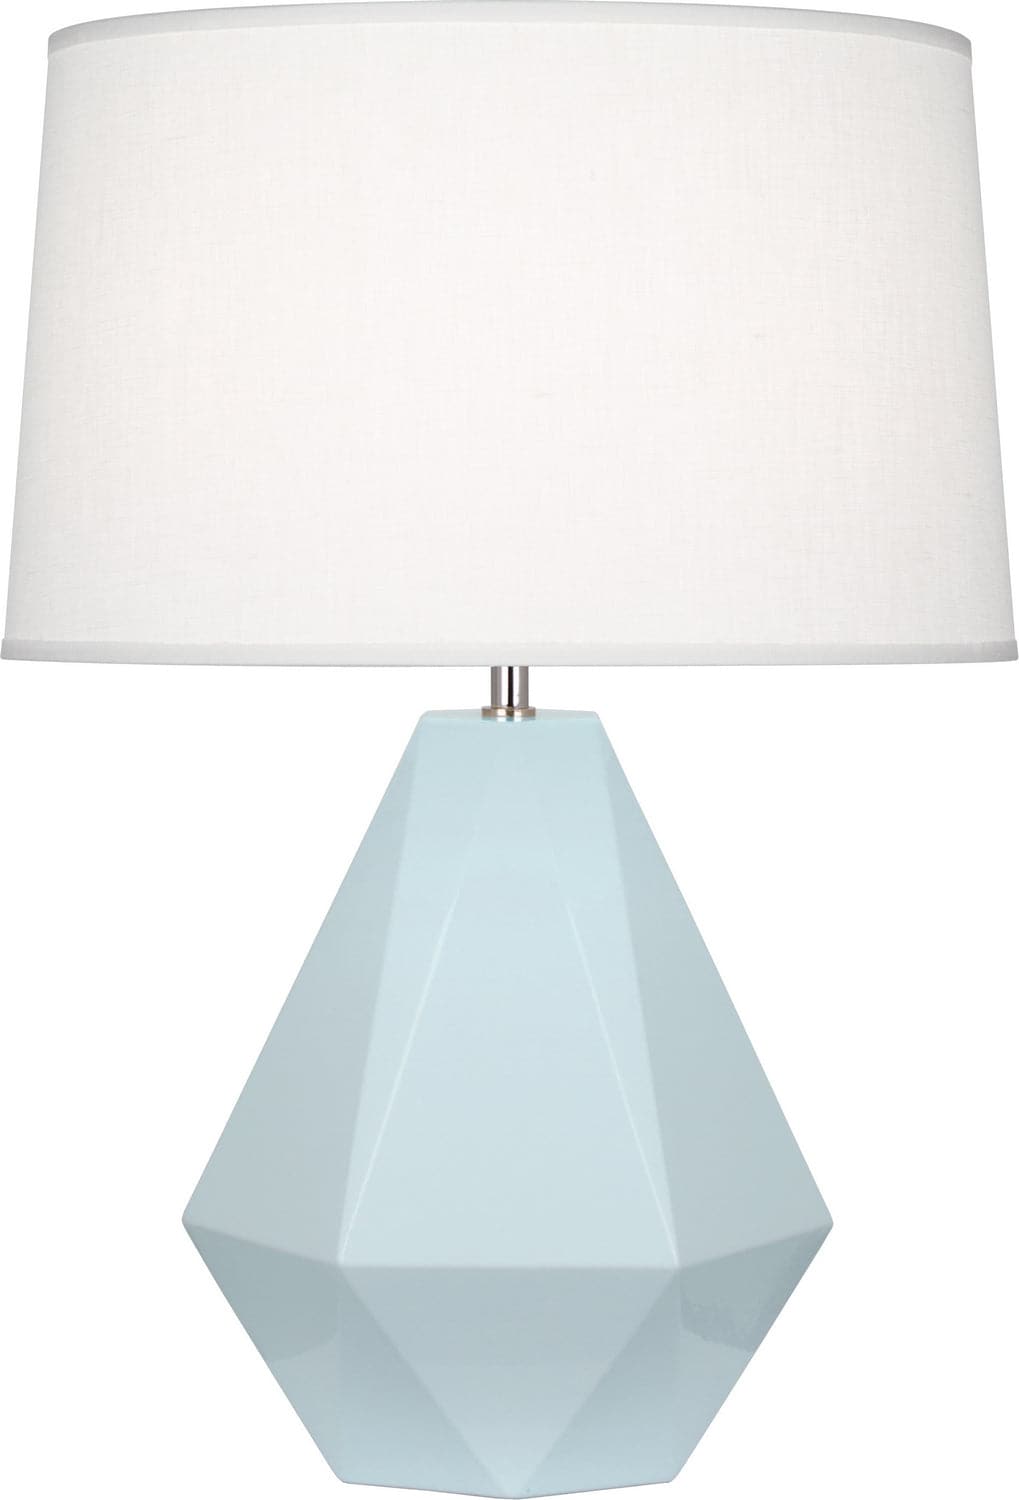 Robert Abbey - 936 - One Light Table Lamp - Delta - Baby Blue Glazed w/Polished Nickel